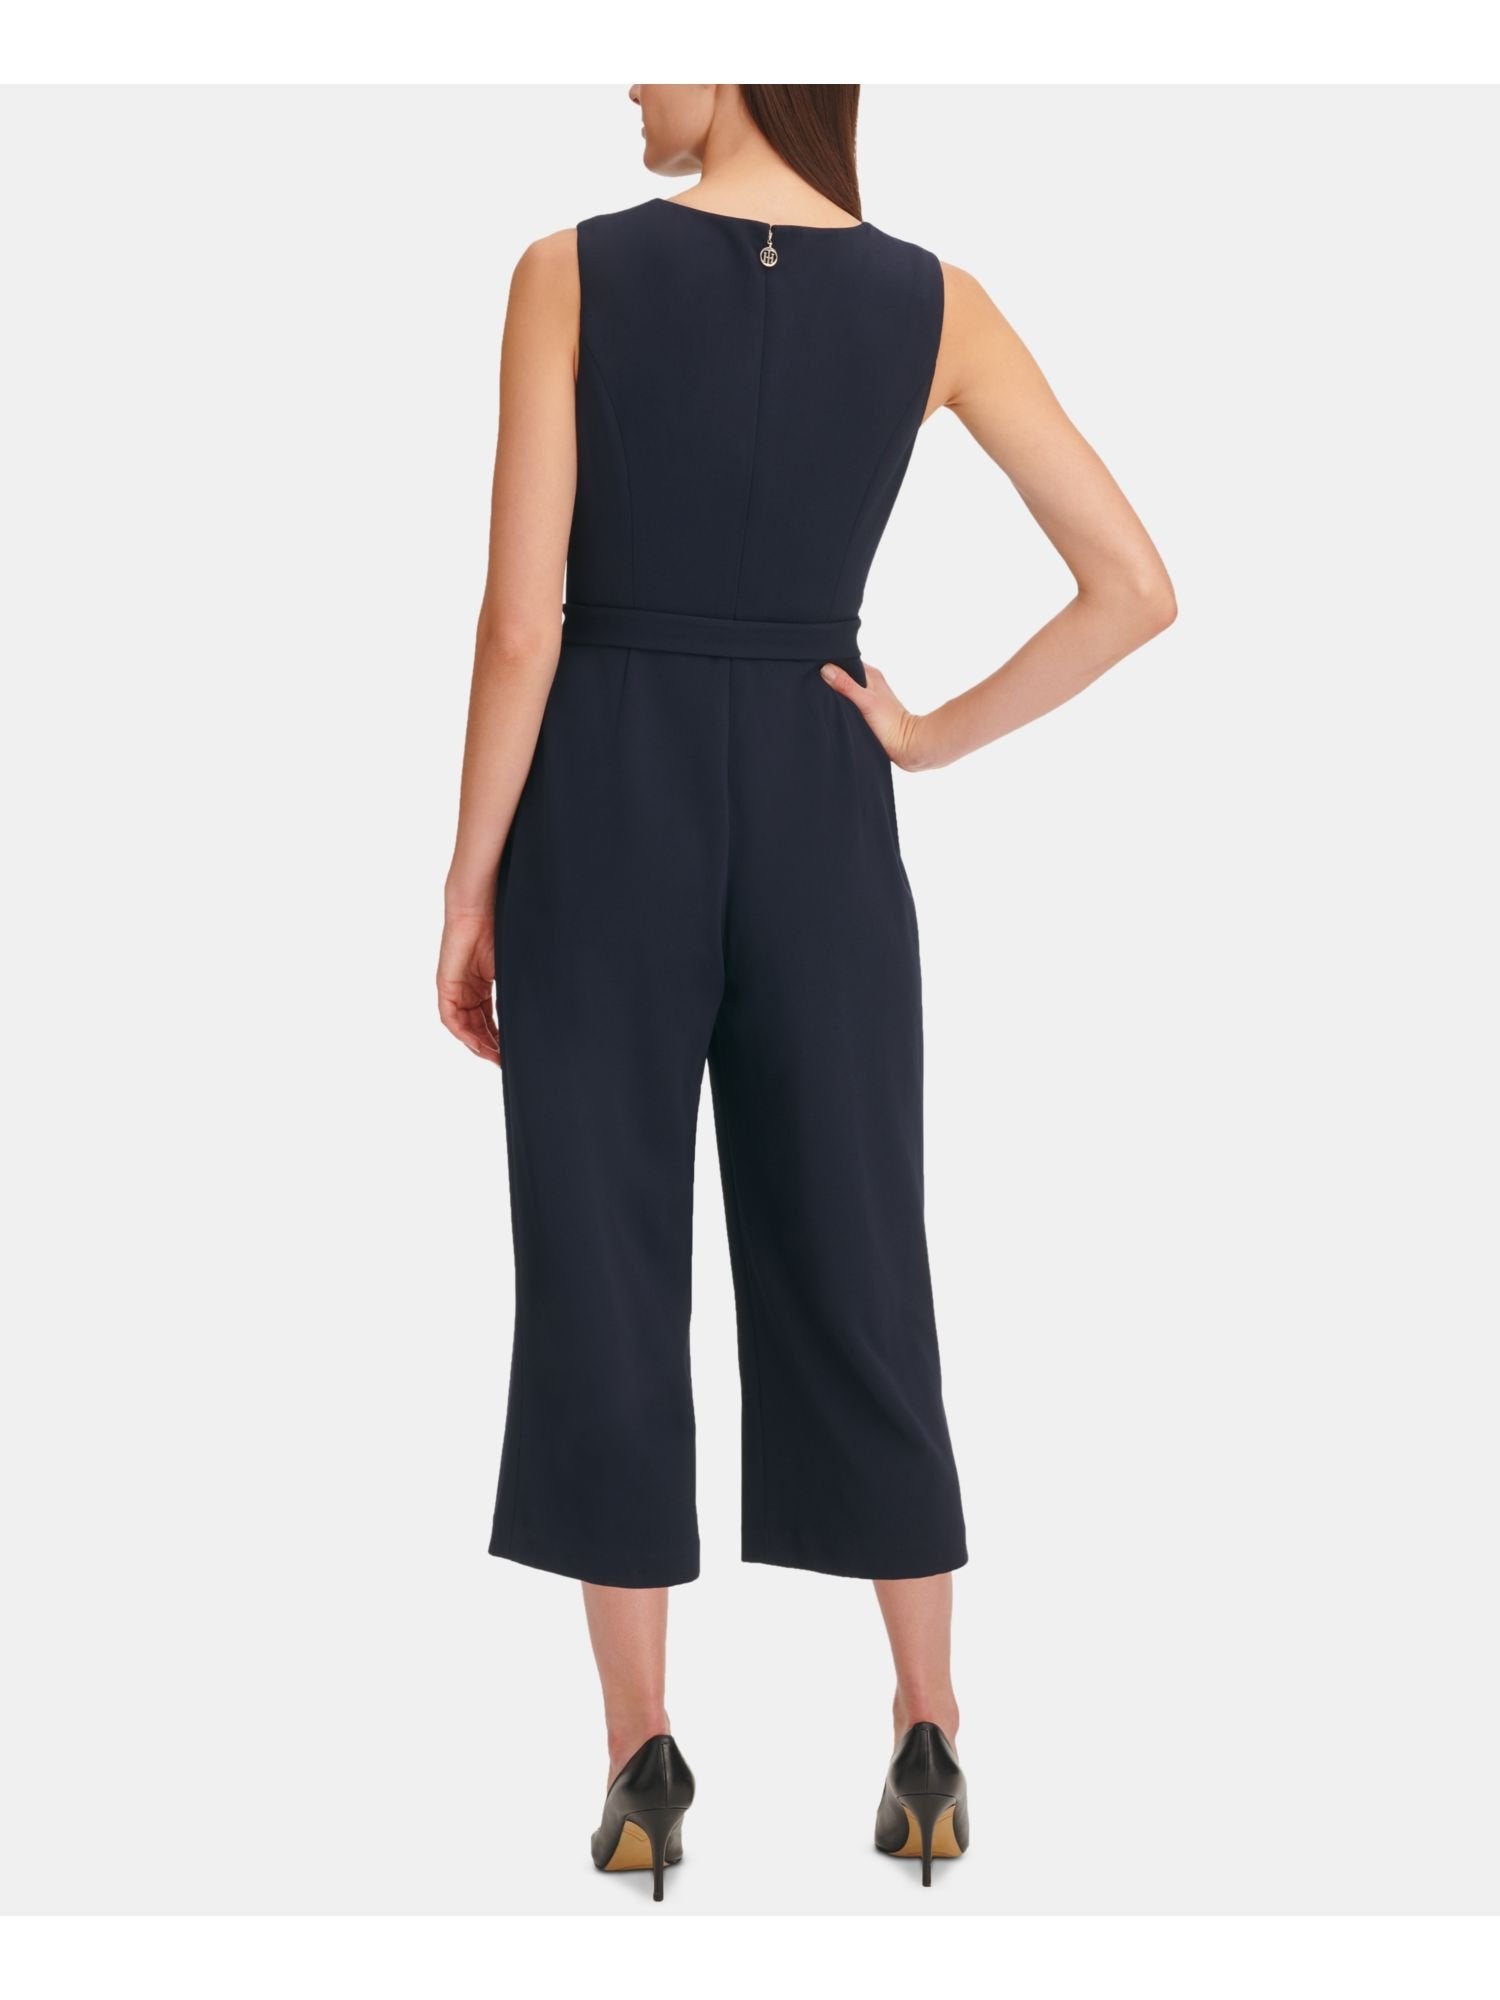 Tommy Hilfiger Sleeveless Jewel Neck Cropped Casual Jumpsuit | Sky captain - All